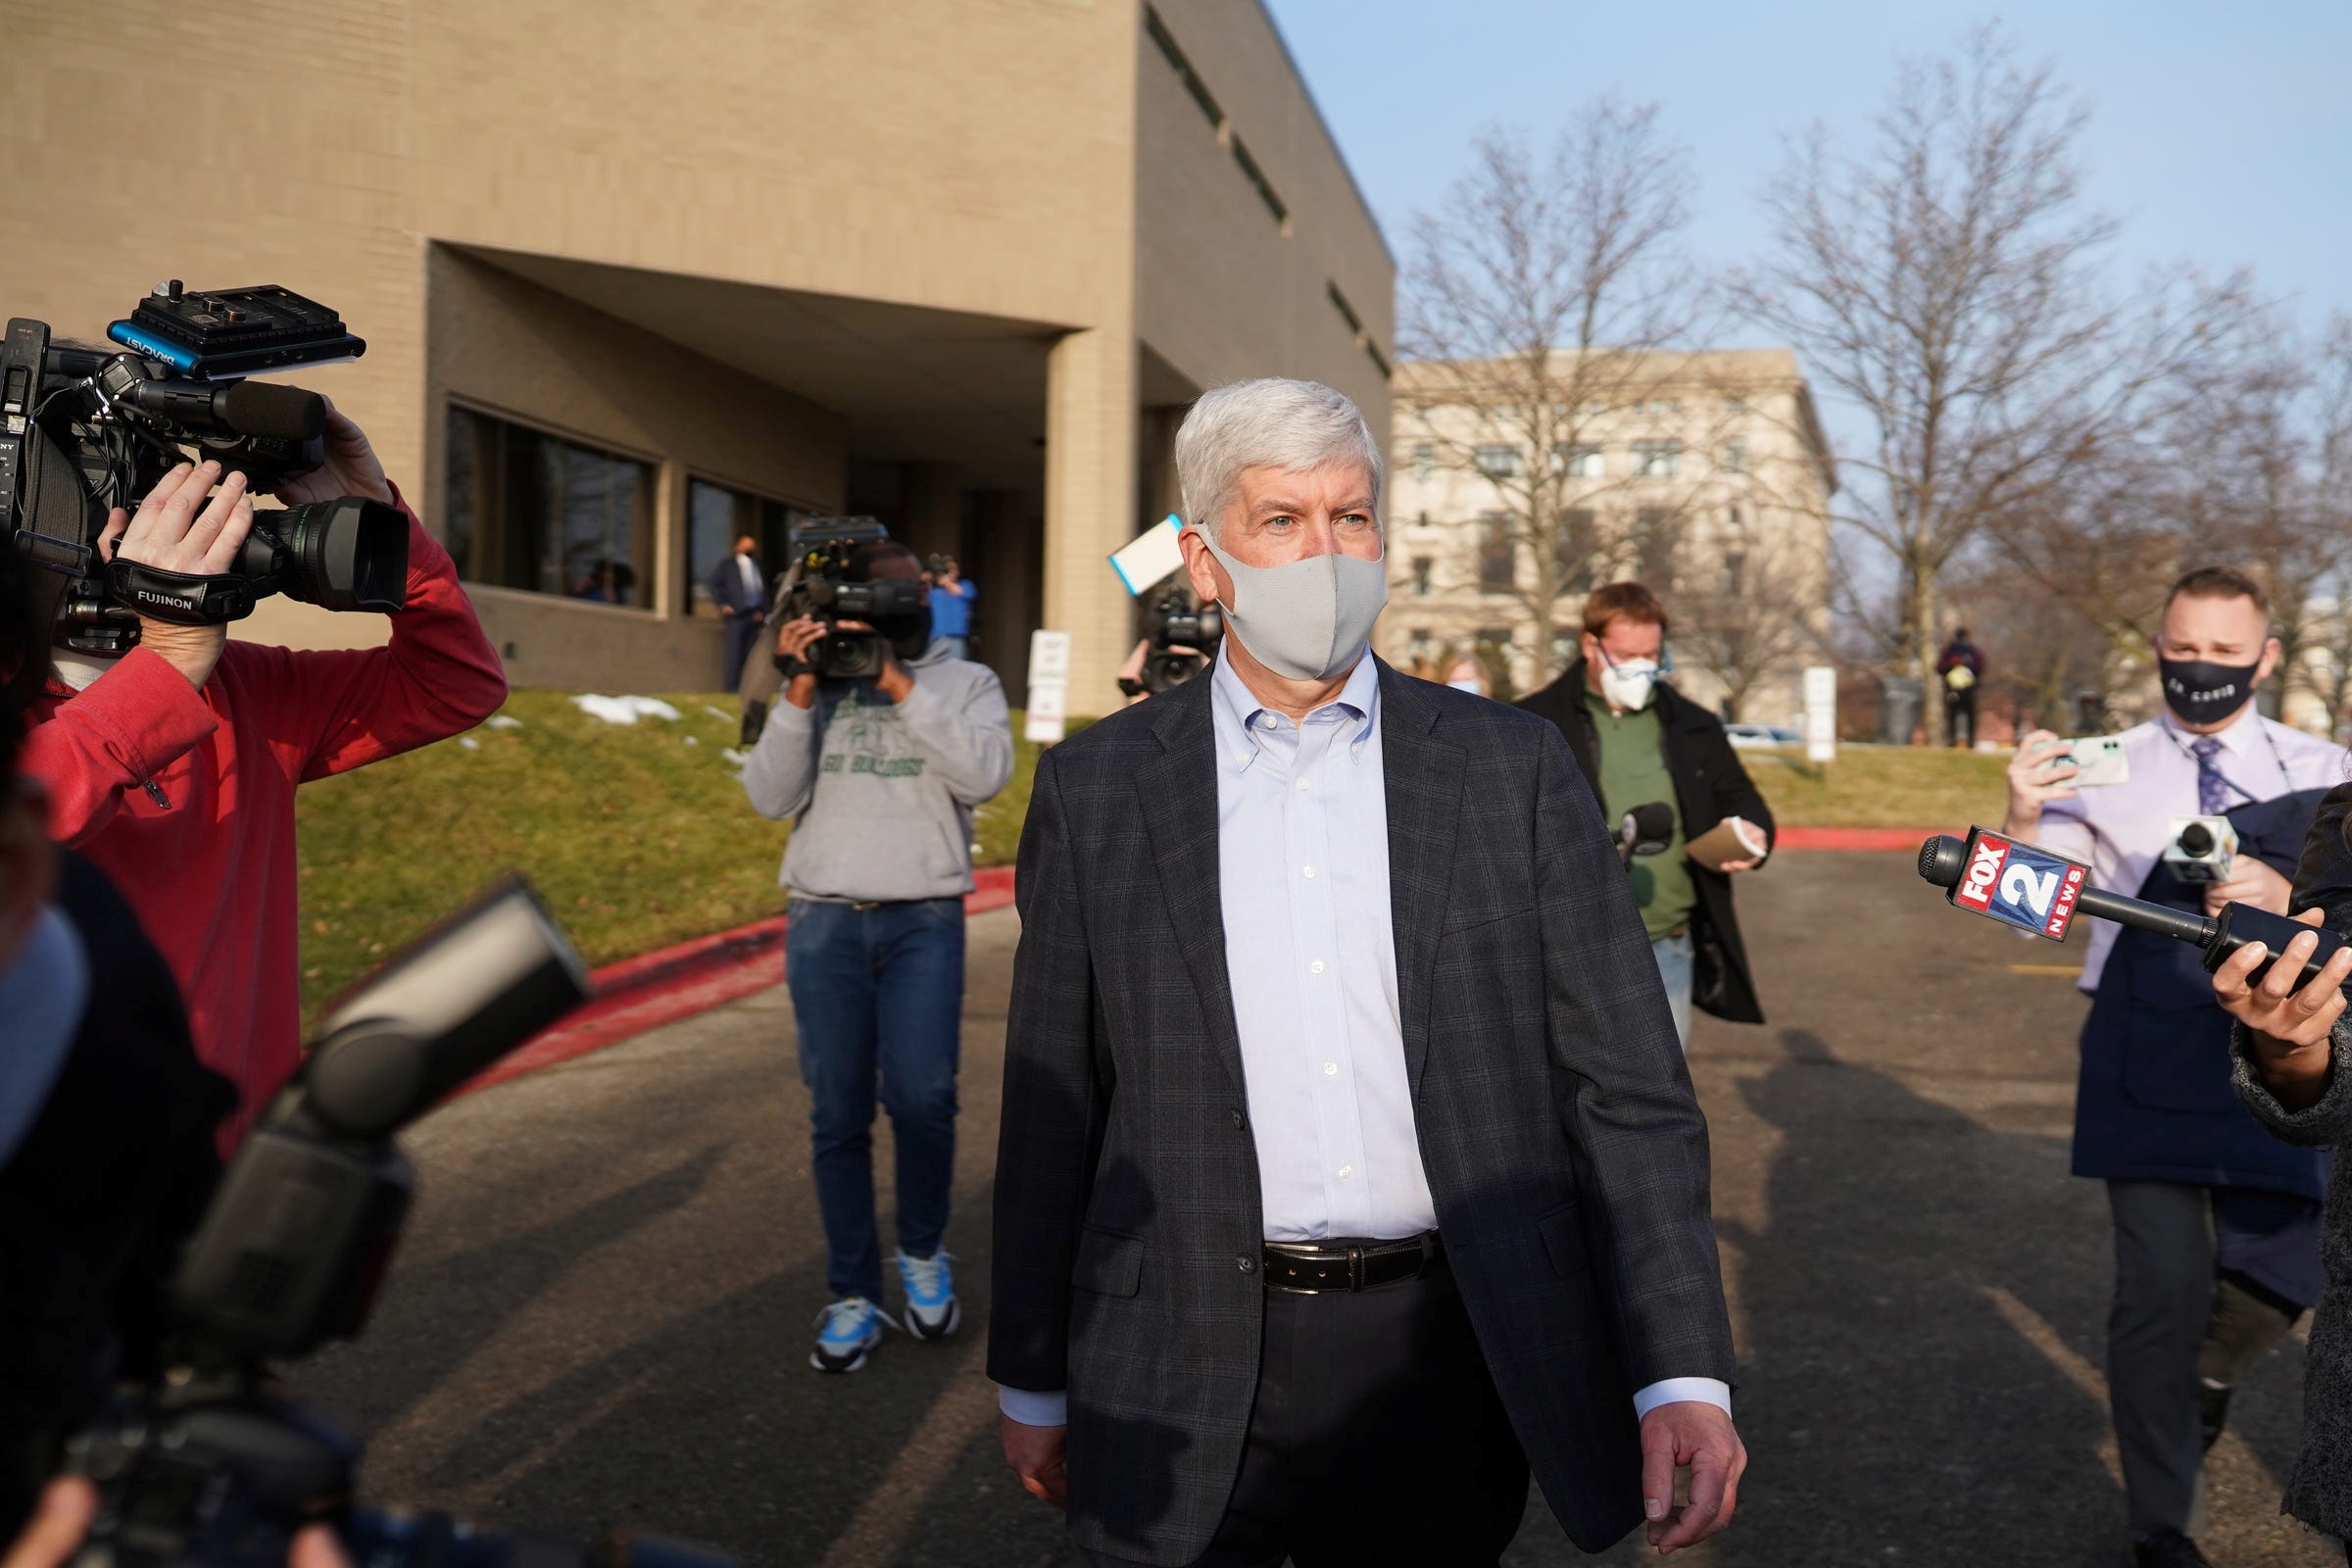 PHOTO: Former Michigan Governor Rick Snyder exits after video arraignment on two counts of willful neglect of duty over the lead-poisoning of drinking water in Flint, at the Genesee County Jail in Flint, Mich., Jan. 14, 2021.